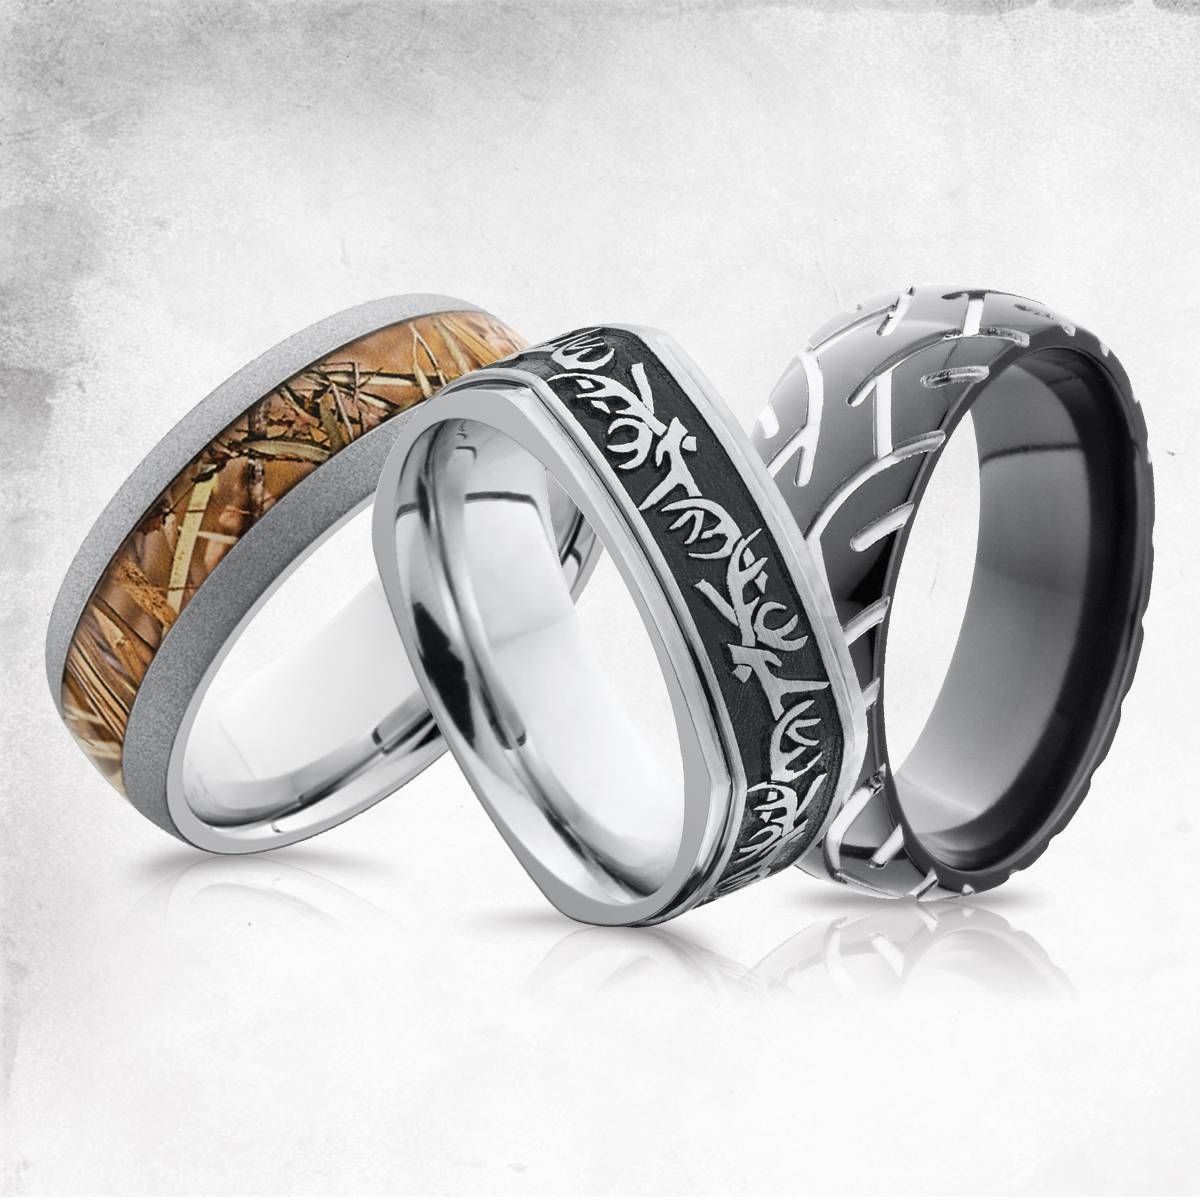 Wedding Rings : Camo Wedding Rings Sets For Her Rose Gold Camo Intended For Current Camo Anniversary Rings (View 6 of 25)